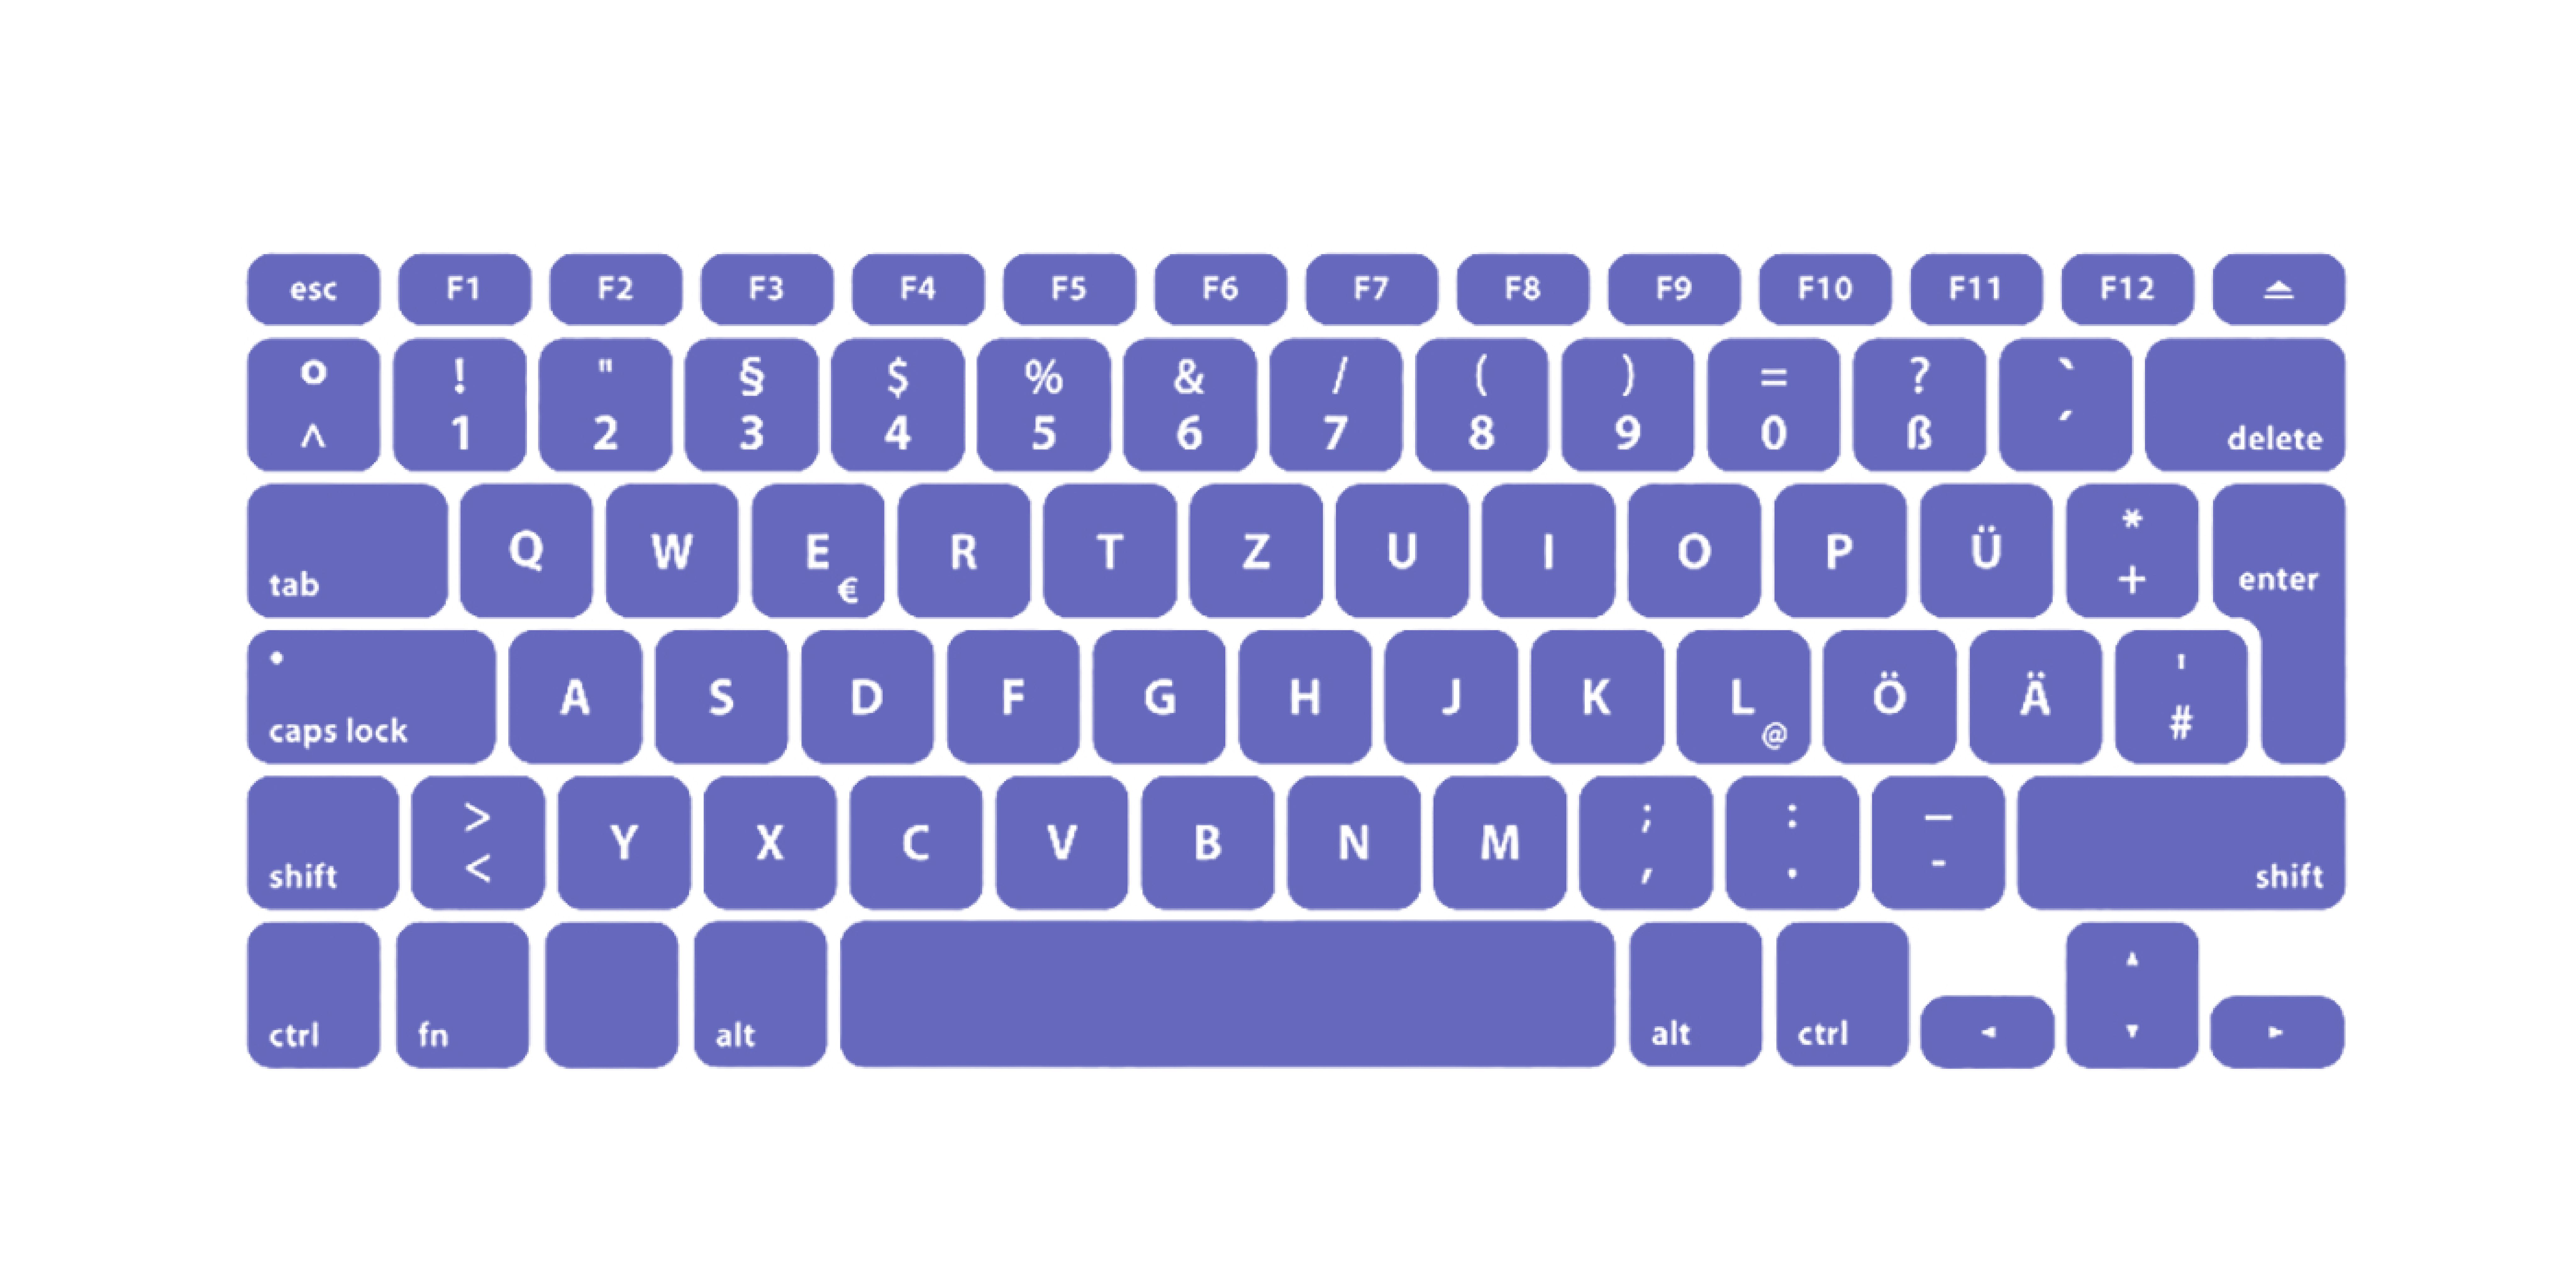 A picture of the German keyboard layout.